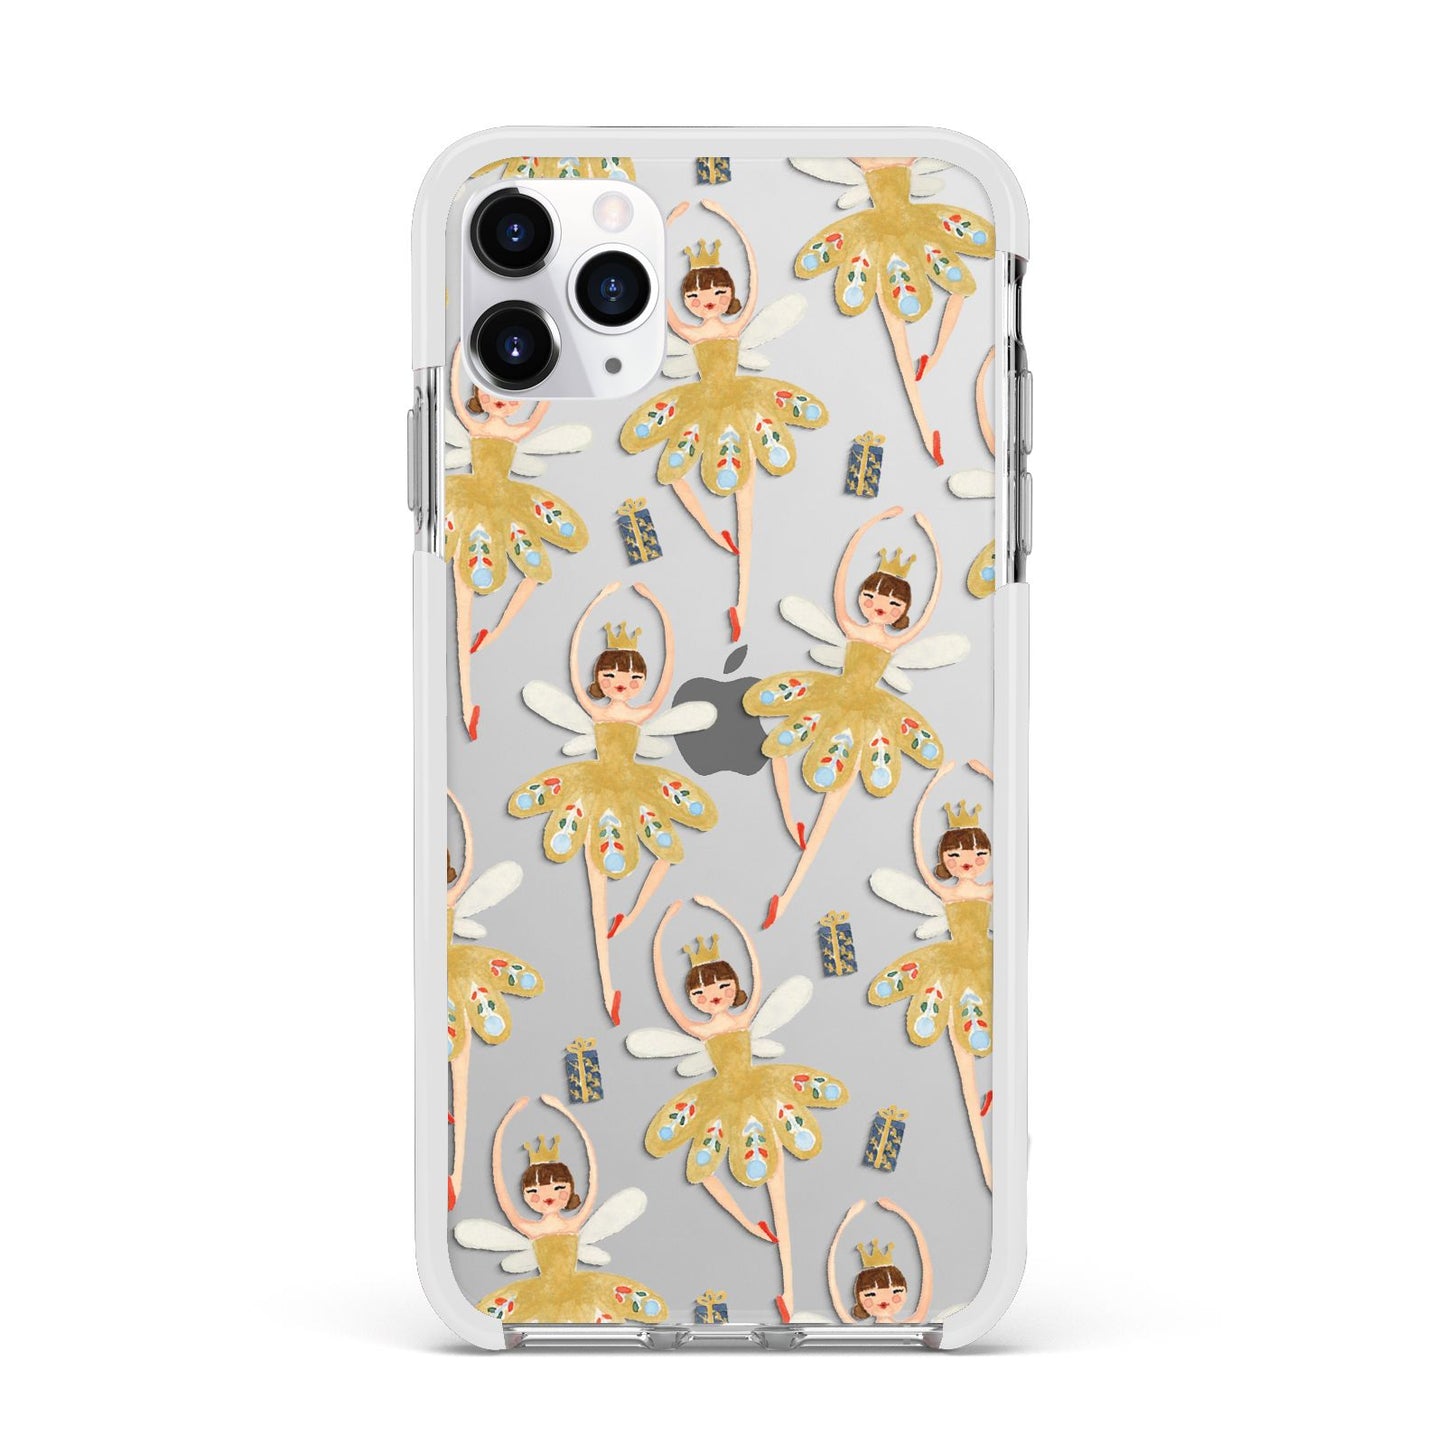 Dancing ballerina princess Apple iPhone 11 Pro Max in Silver with White Impact Case